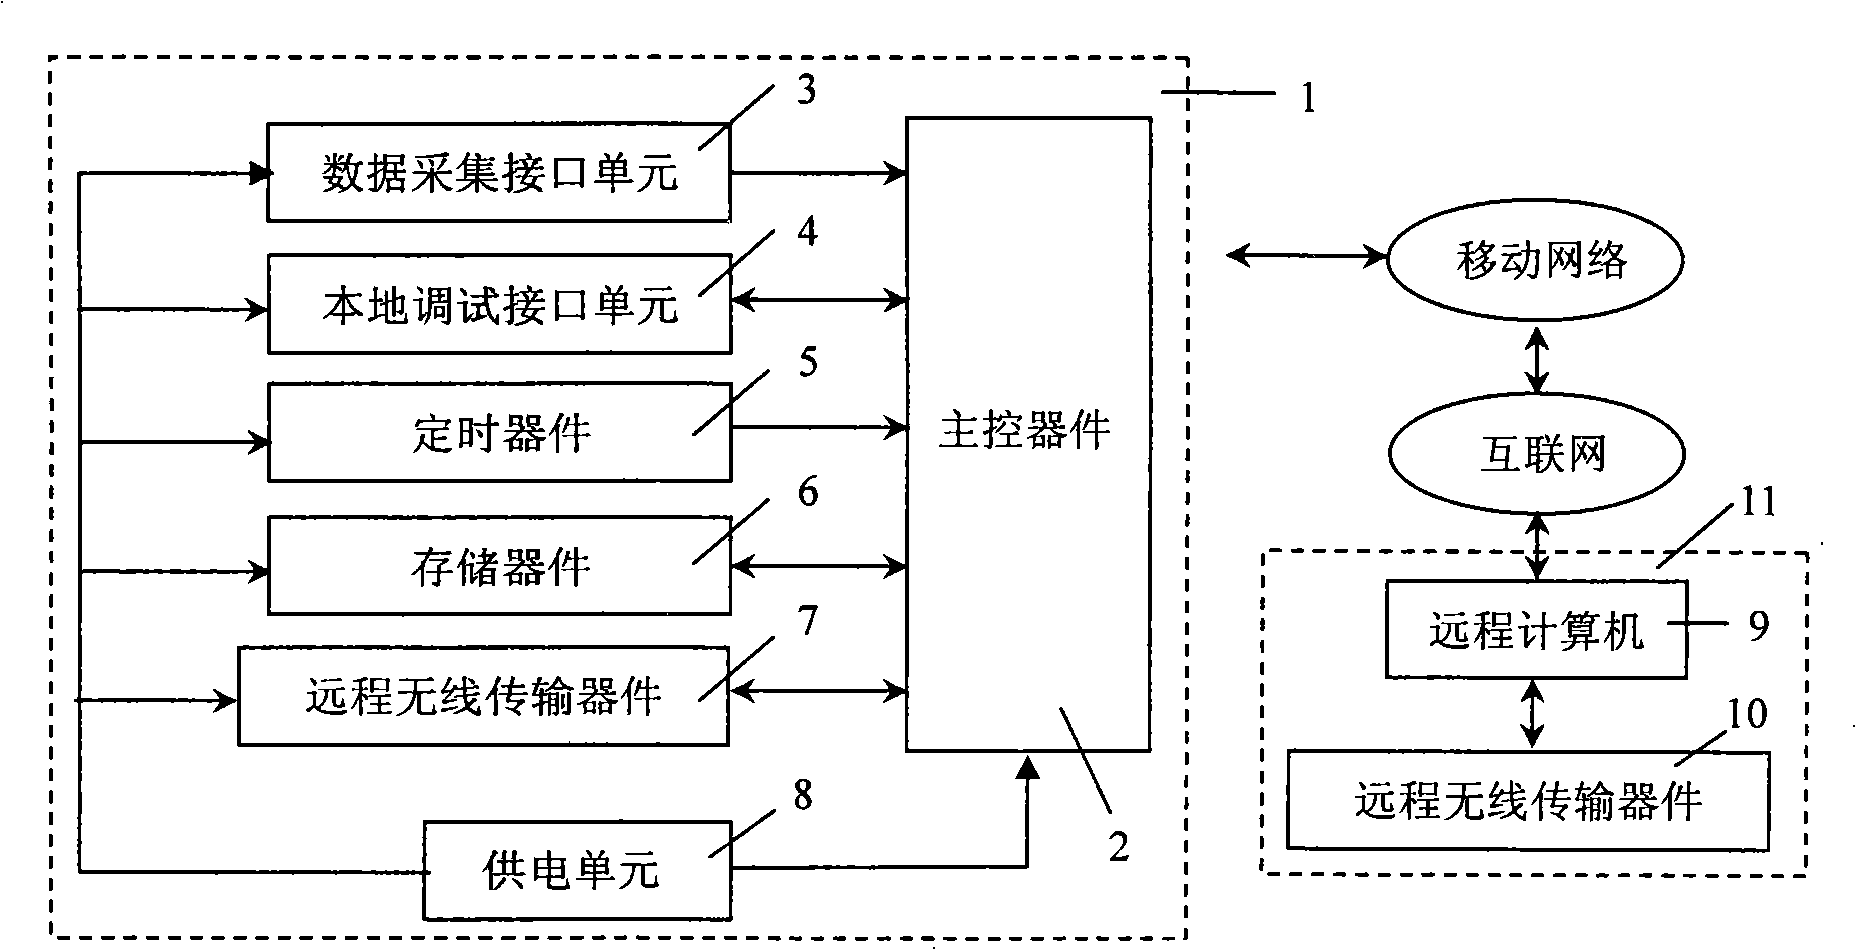 Device for remote wireless monitoring for industrial on-site parameters